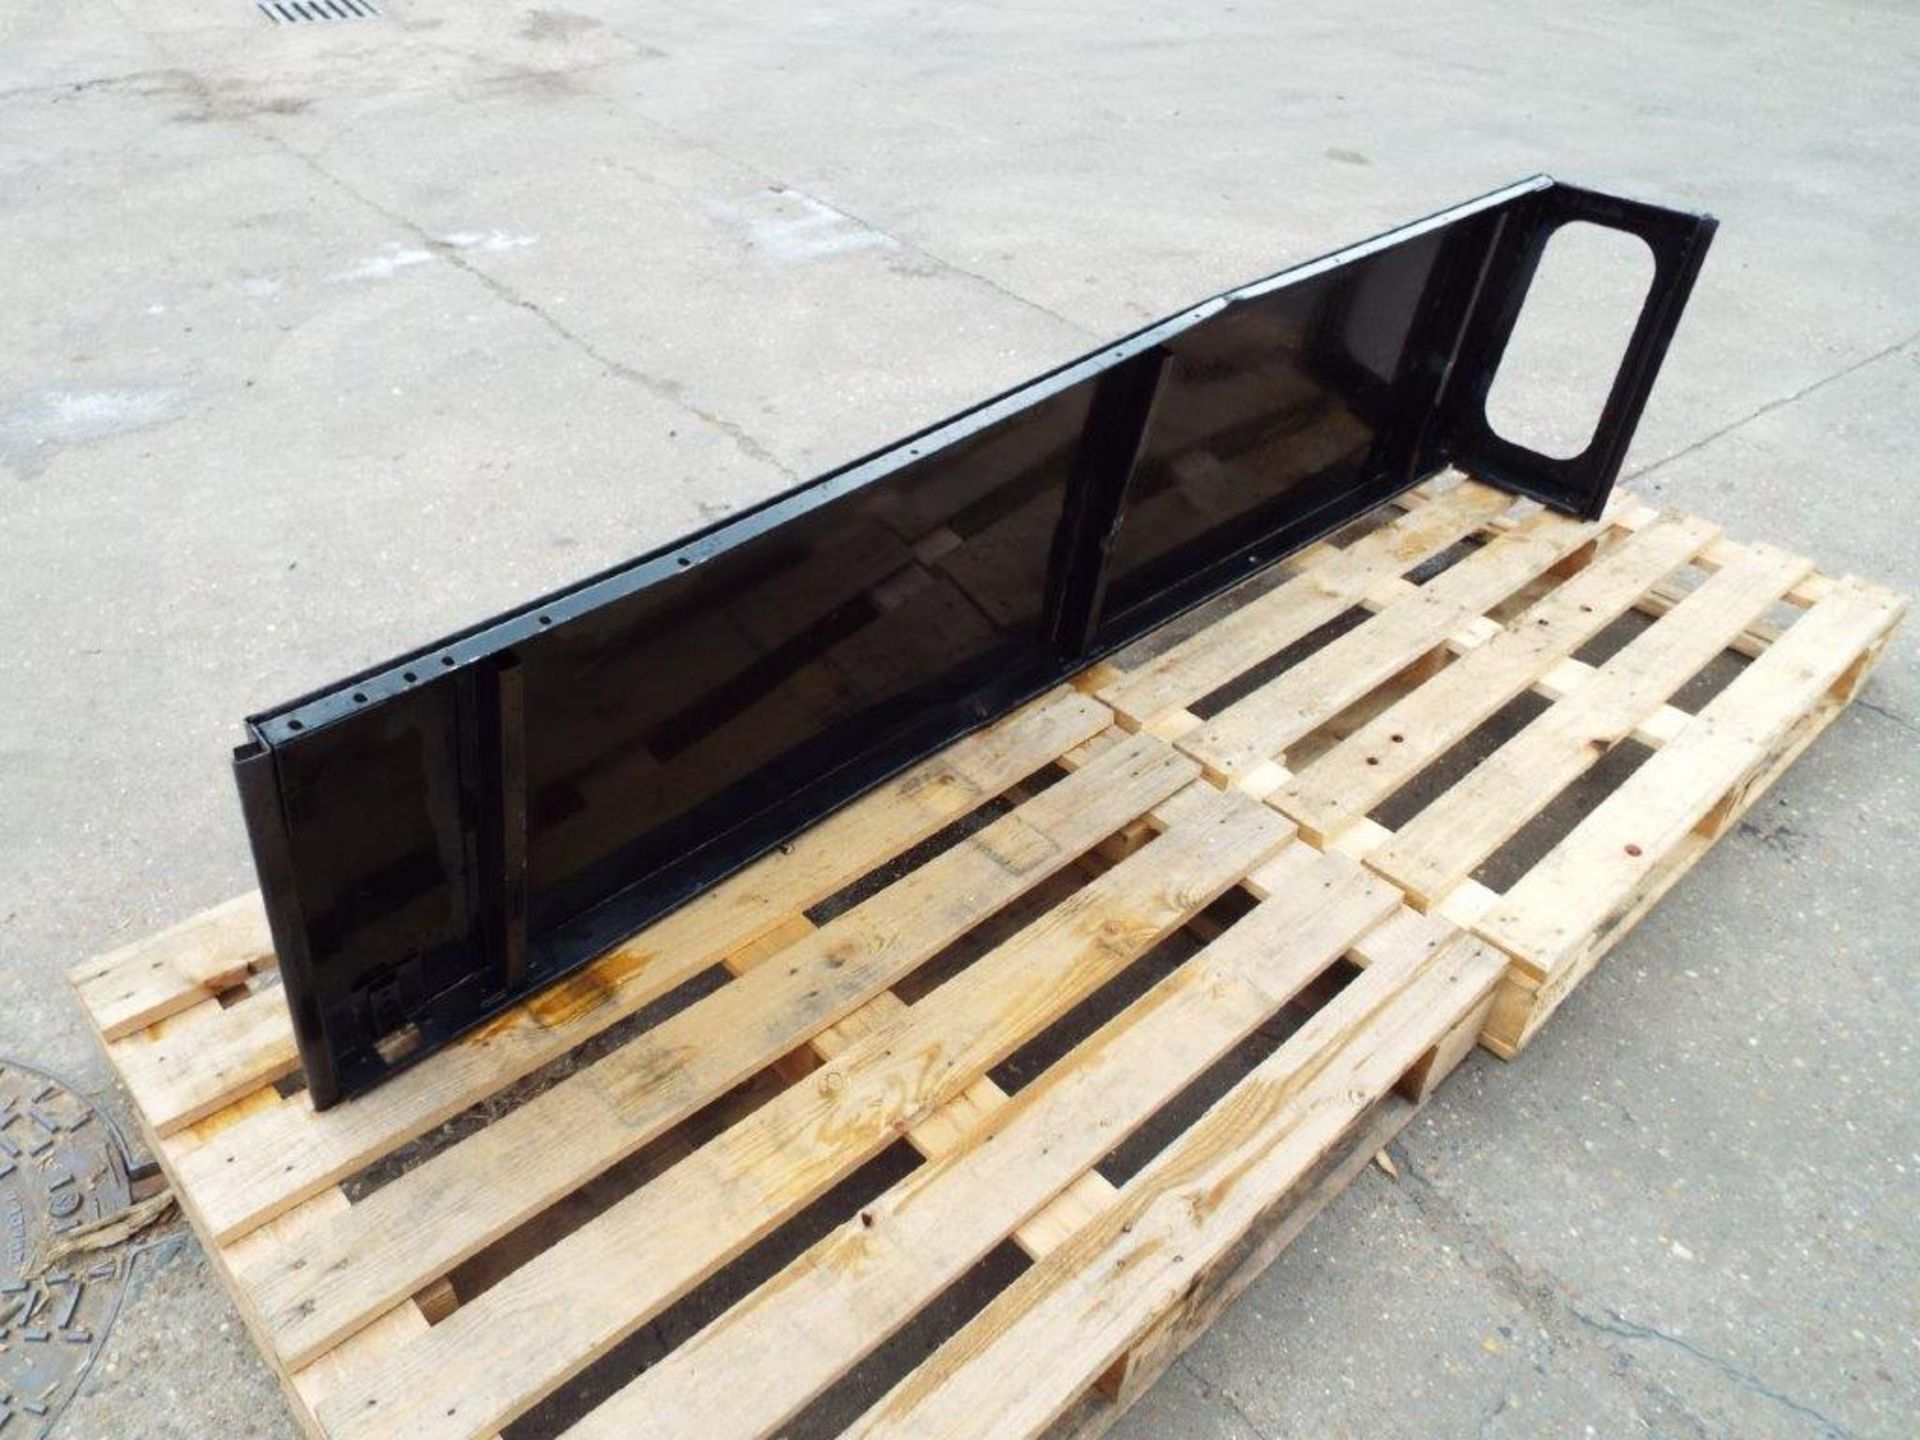 2 x Land Rover Defender 110 Rear Body Panels - Image 7 of 10